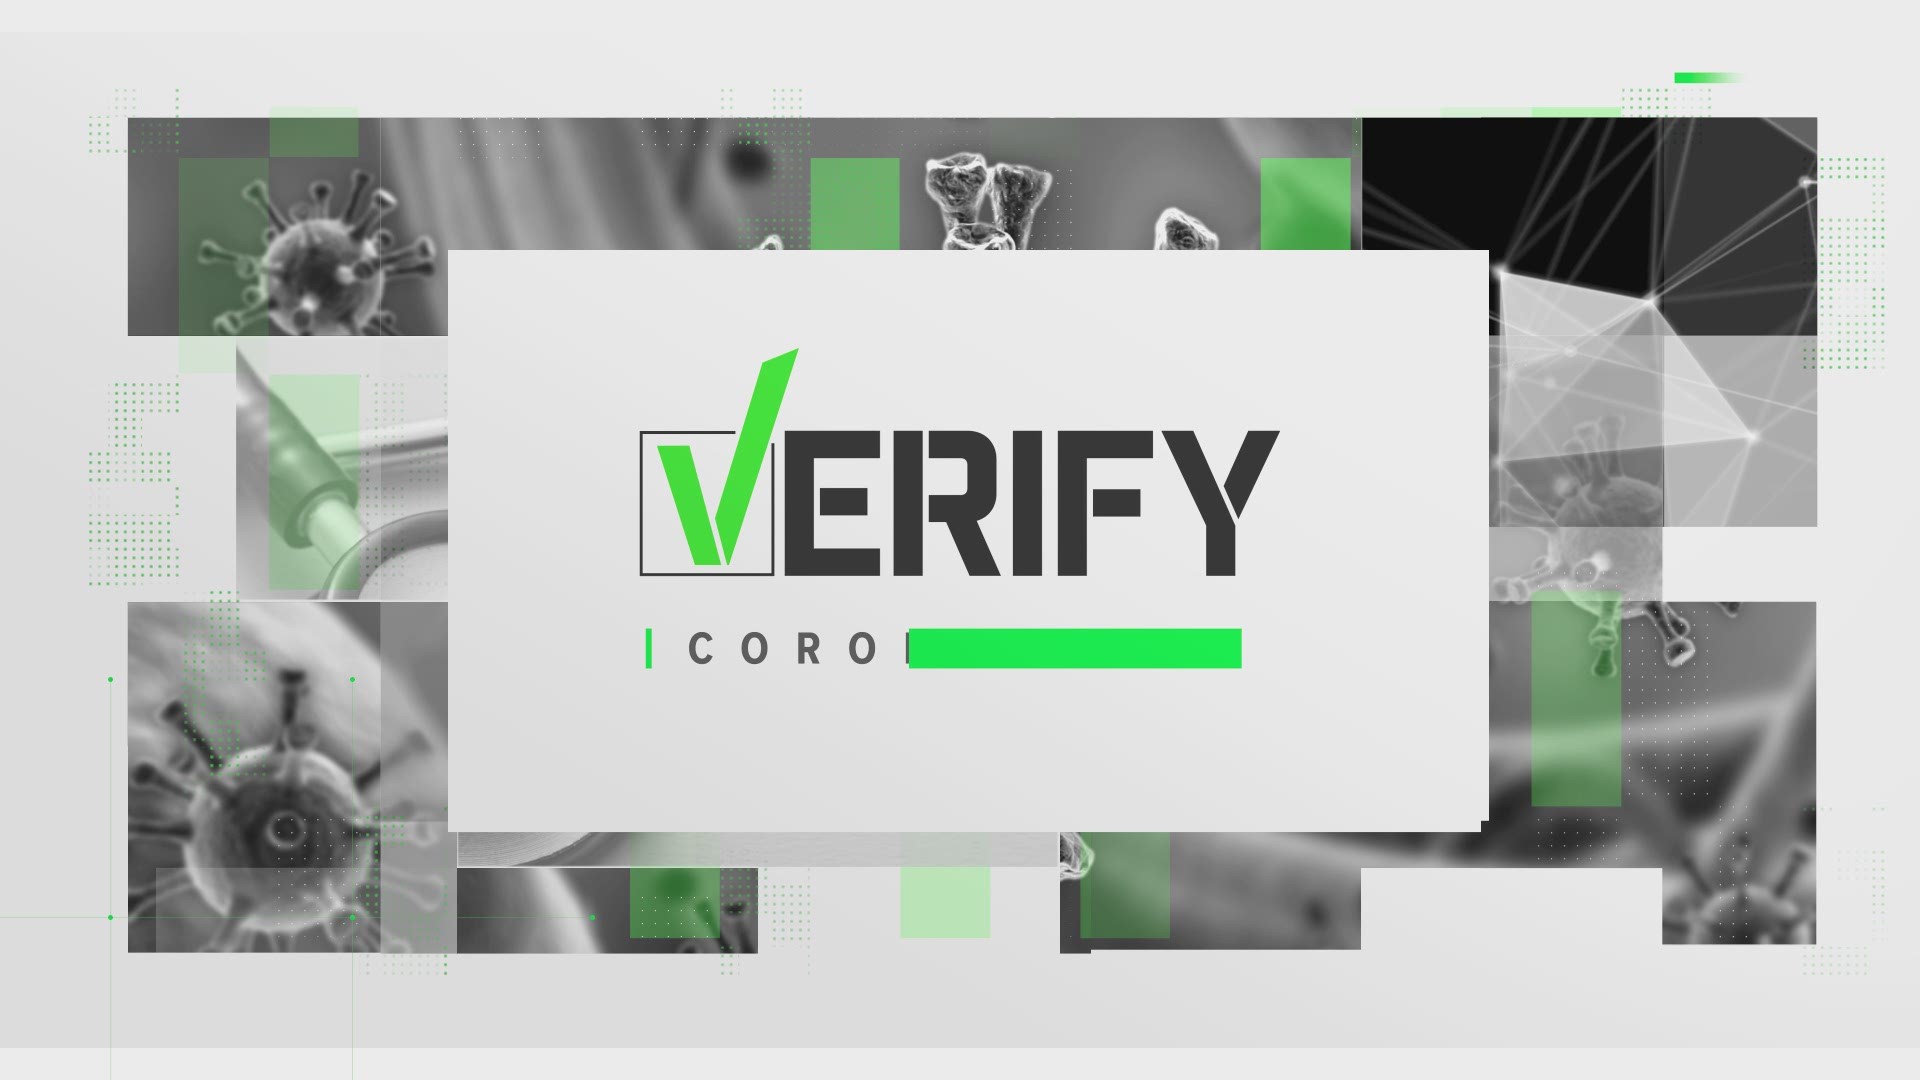 The VERIFY Team spoke with infectious disease specialists about what happens if you skip the second dose of the vaccine, or take it late or early.